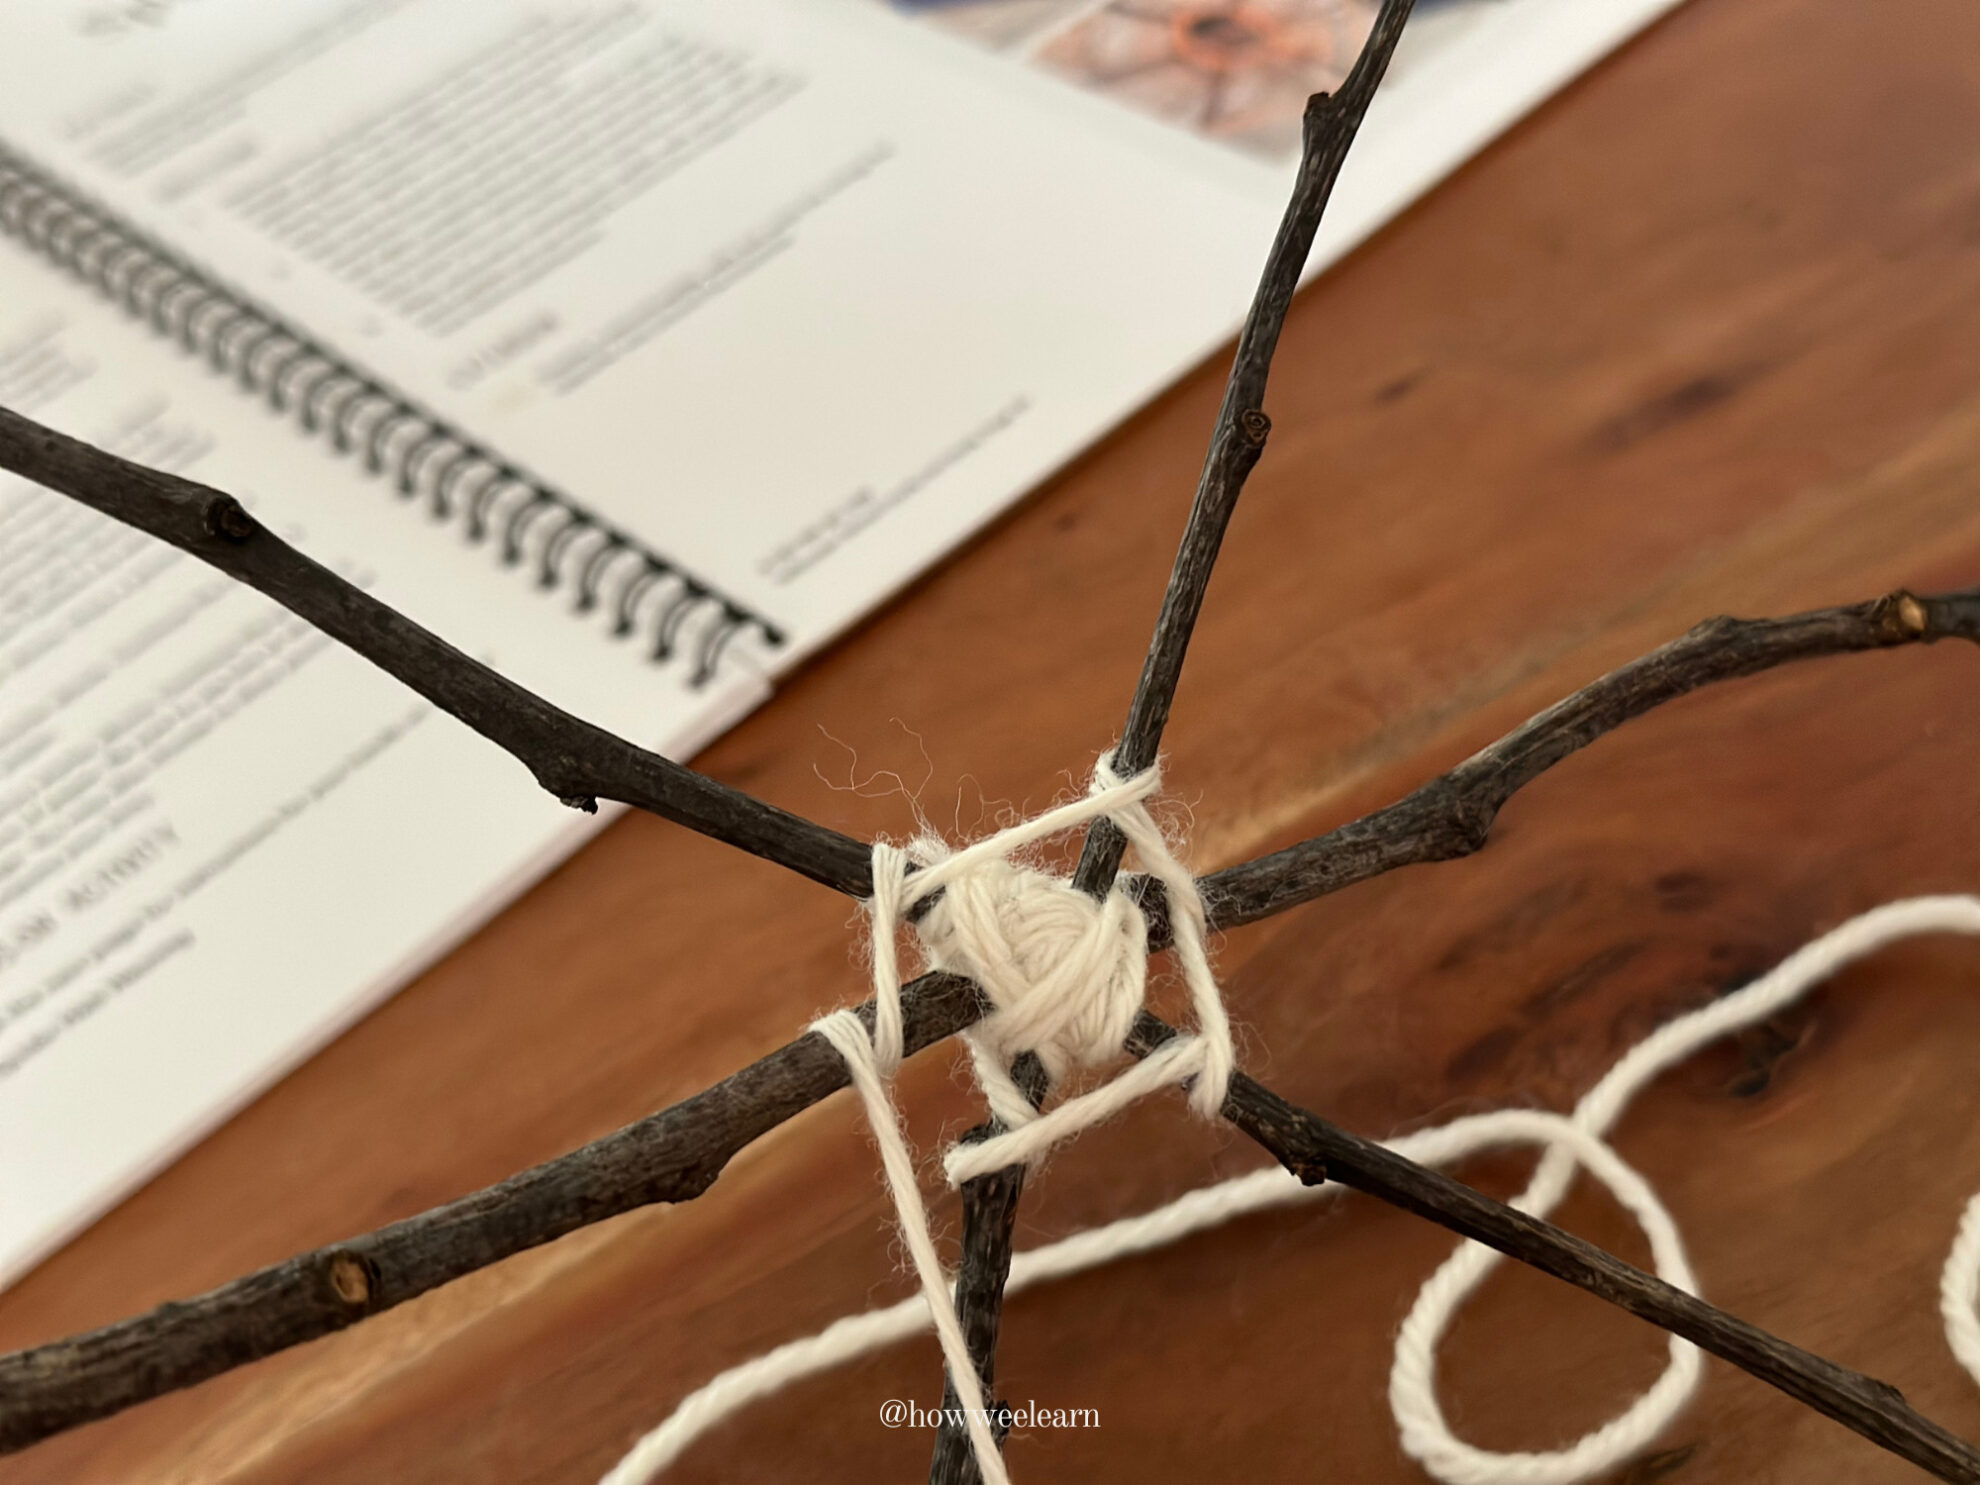 Spider Web Weaving: Wrap the yarn around each stick, moving around each stick in a circle